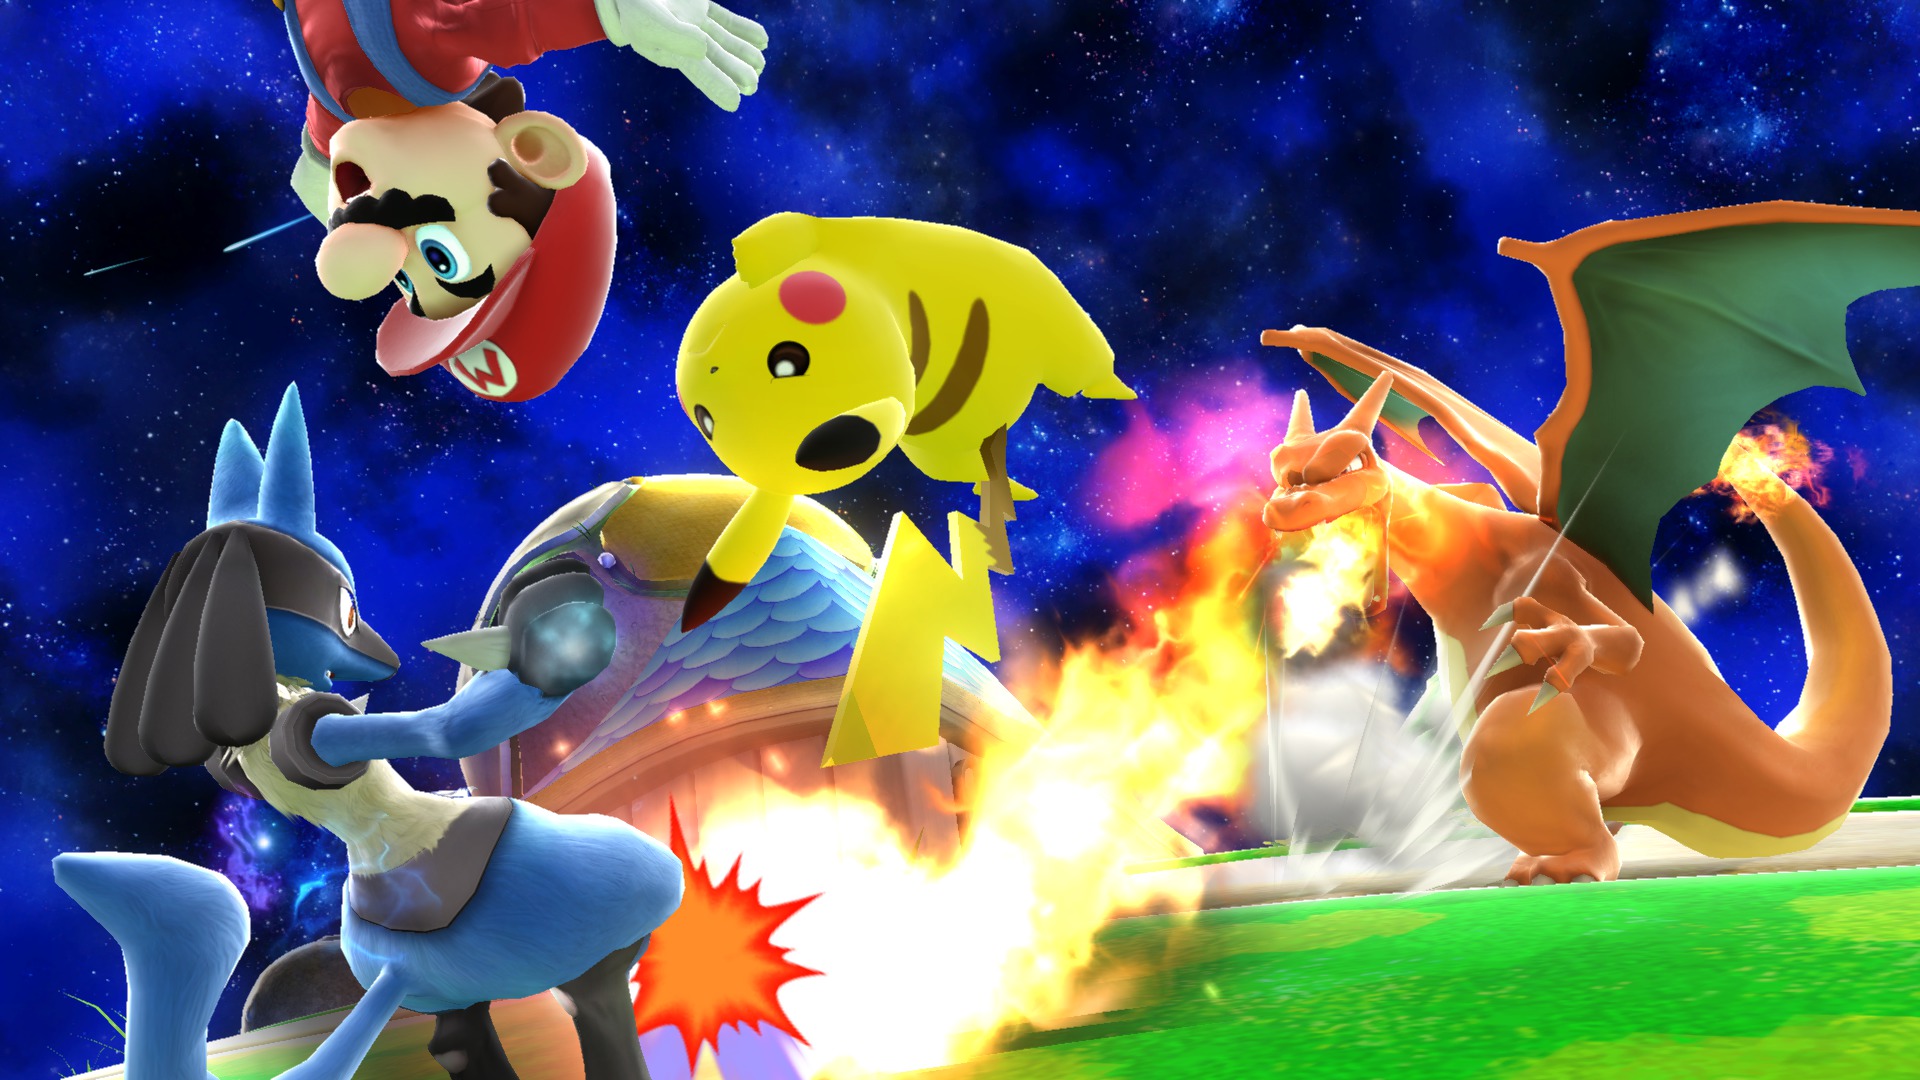 Fighting Game Does Smash Bros Fit The Genre